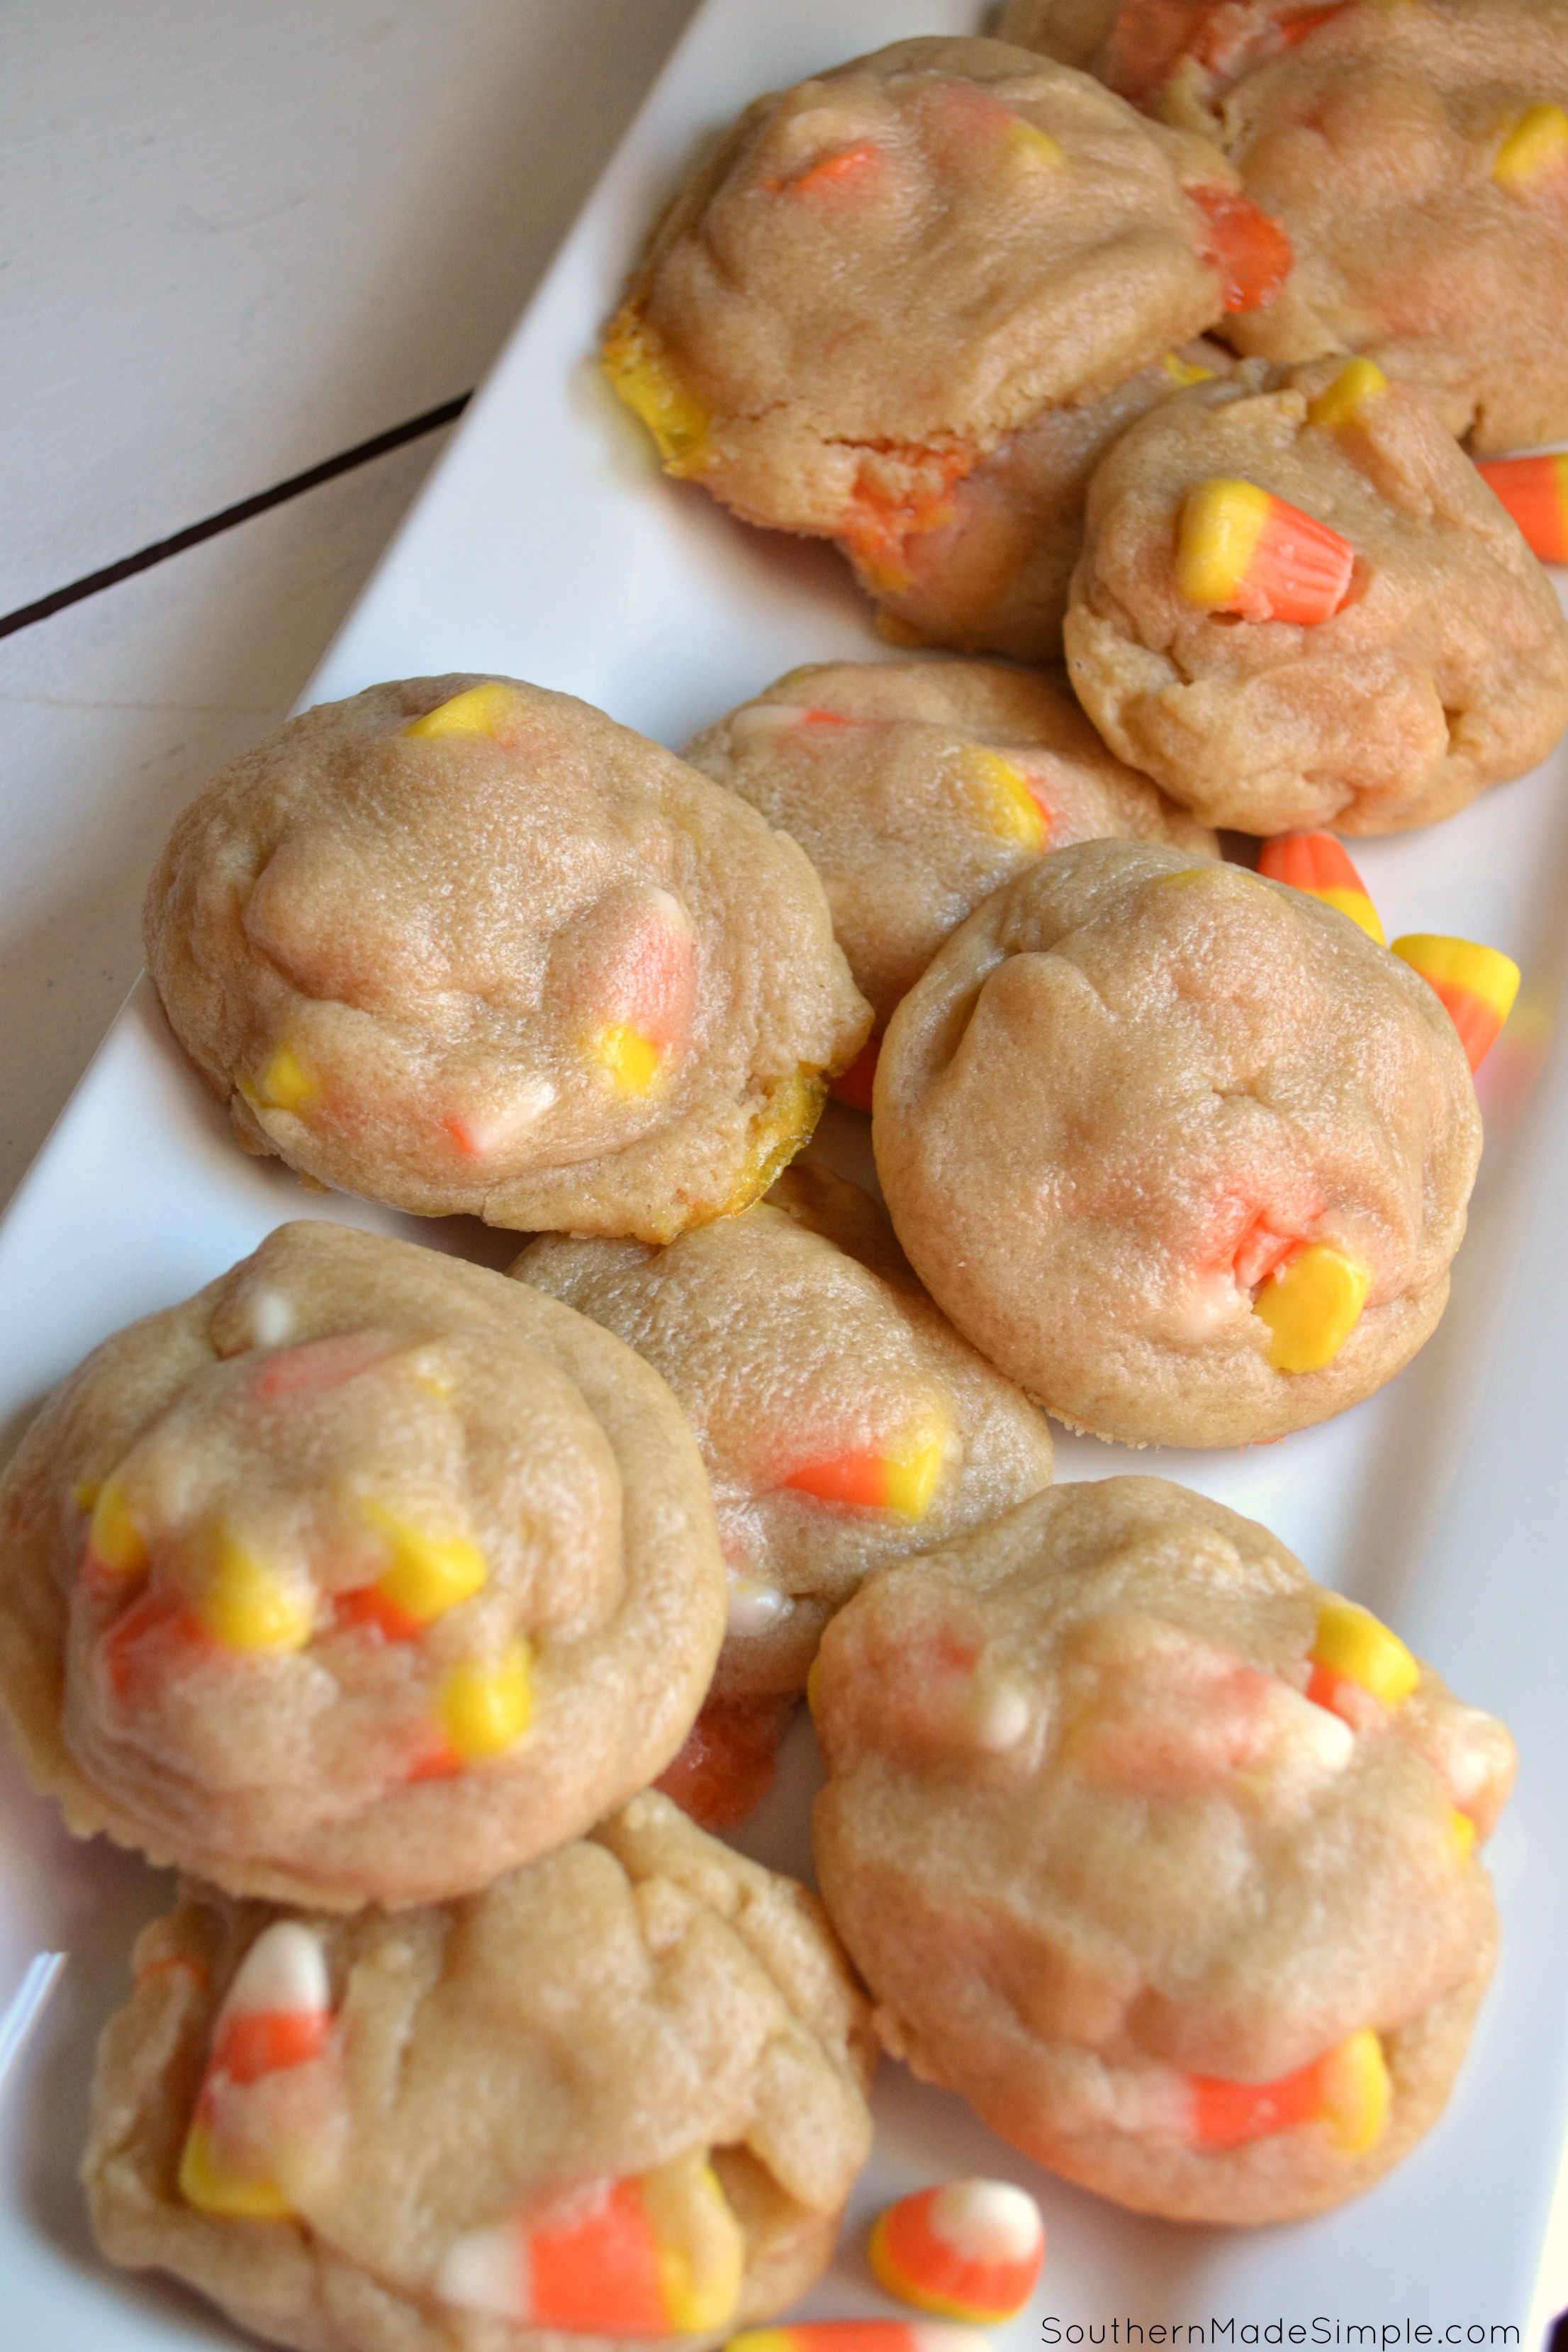 If you're a candy corn fan, you're definitely going to want to try this! This recipe makes the most delicious soft & chewy cookies - and they're perfect to make for a sweet Halloween treat!